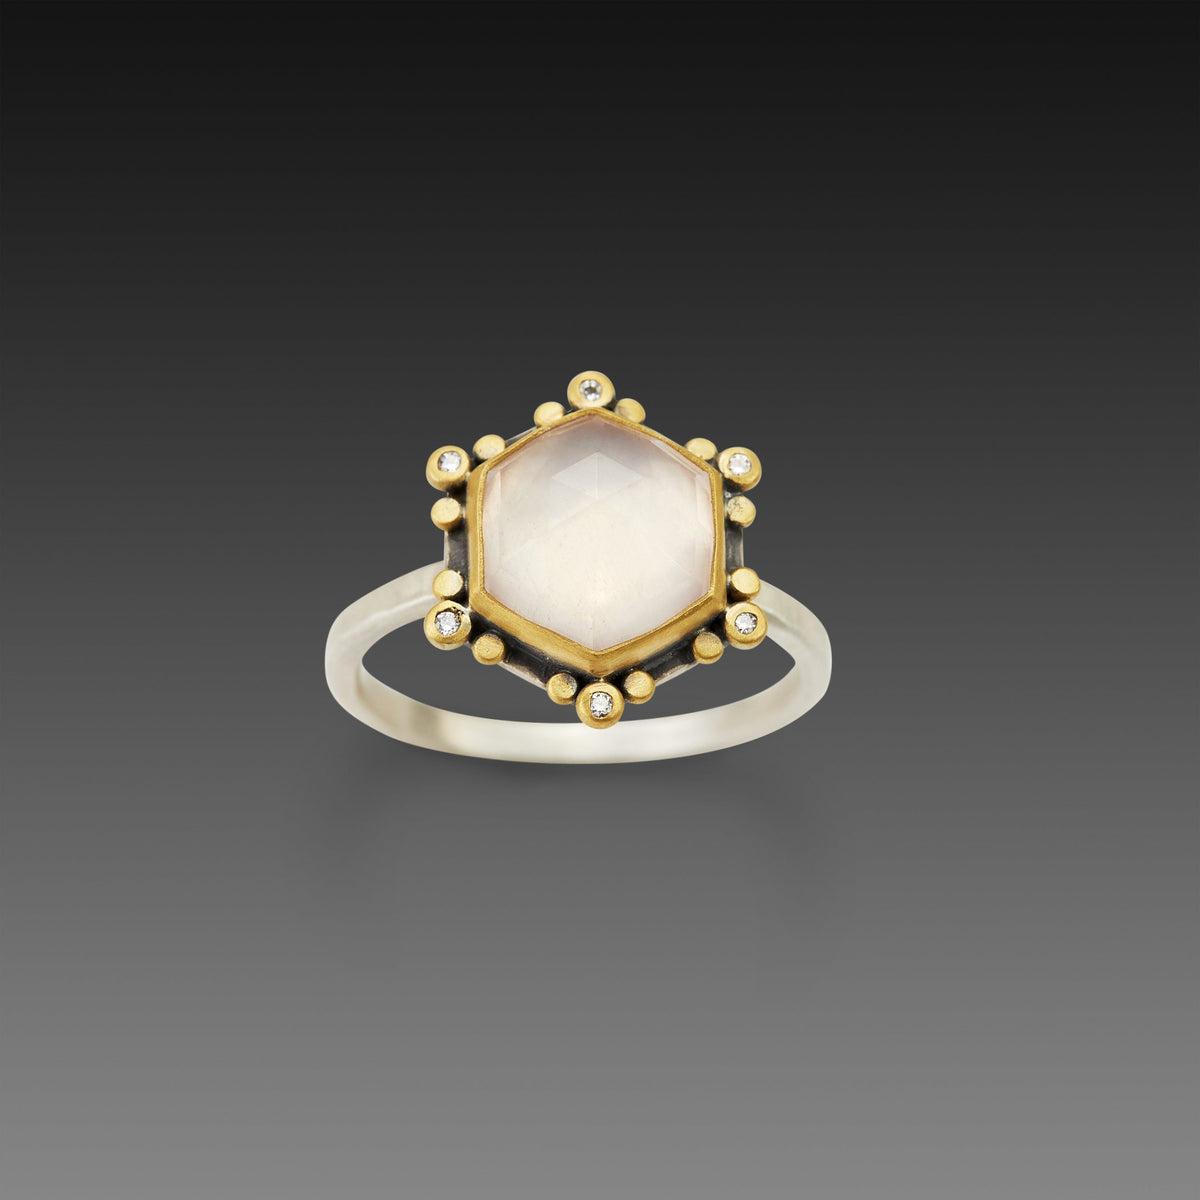 Mother of Pearl Color Blossom Diamond Star Ring